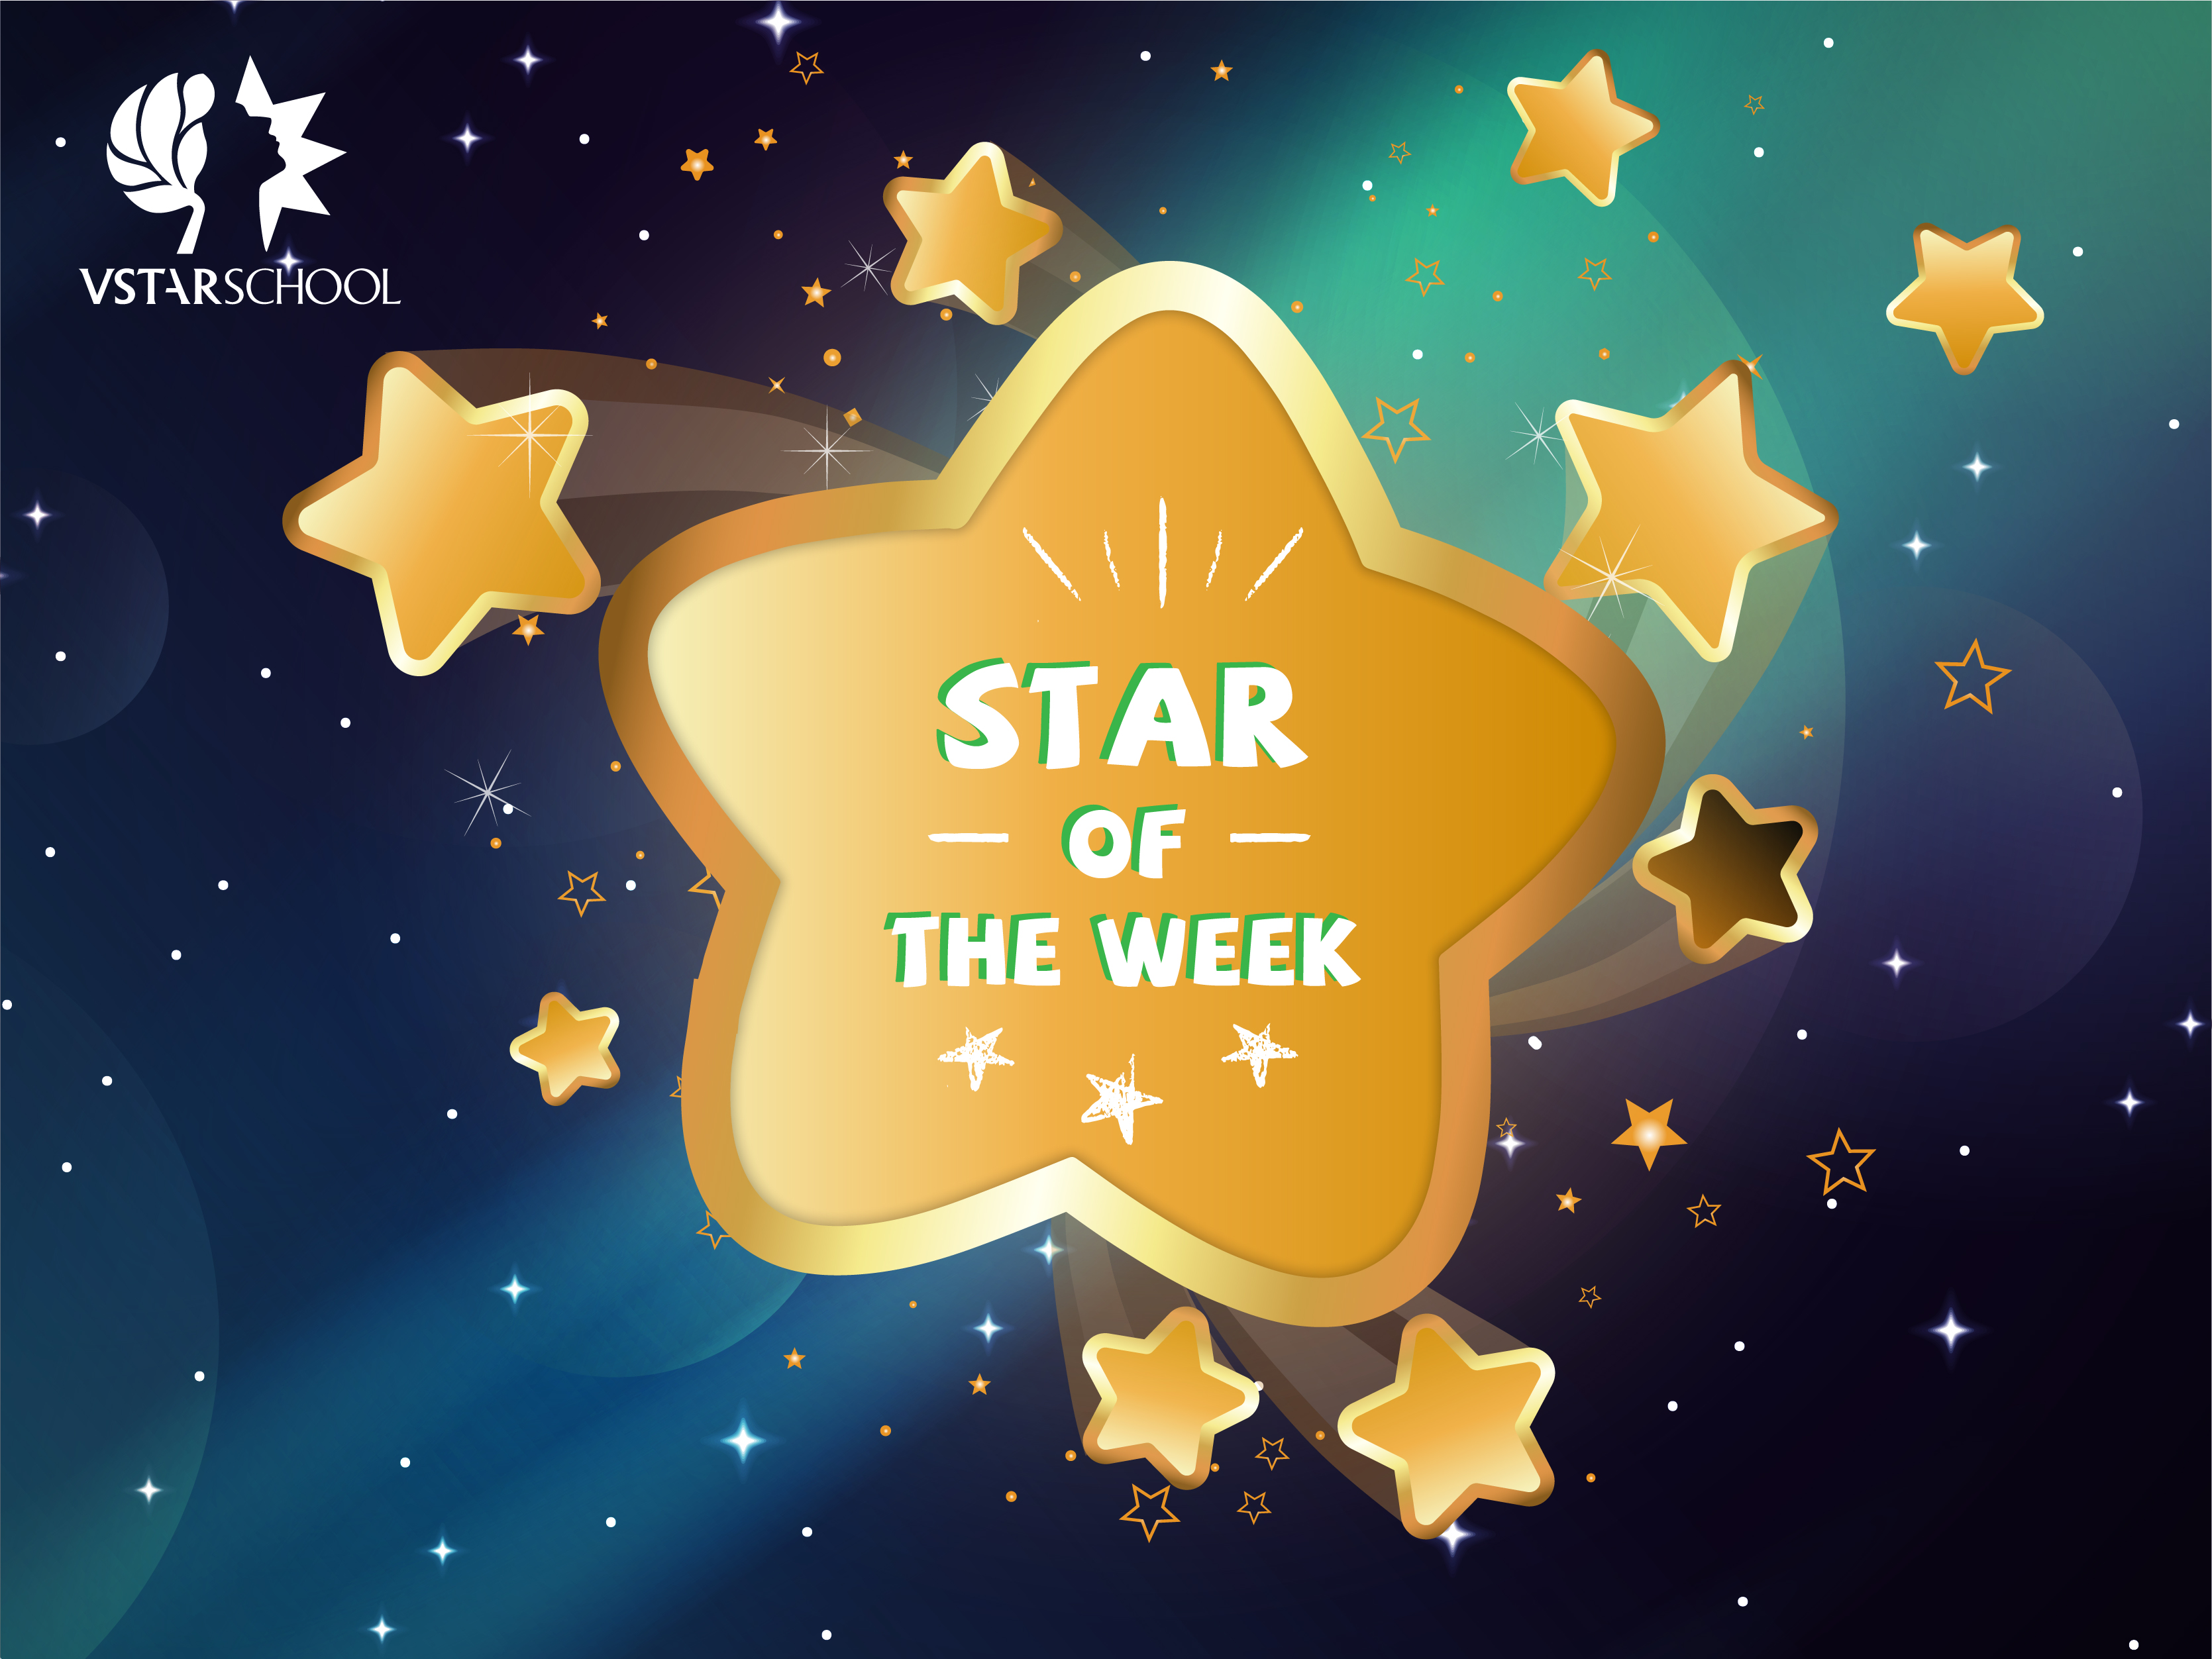 STAR OF THE WEEK TUẦN 1 - 06/2020